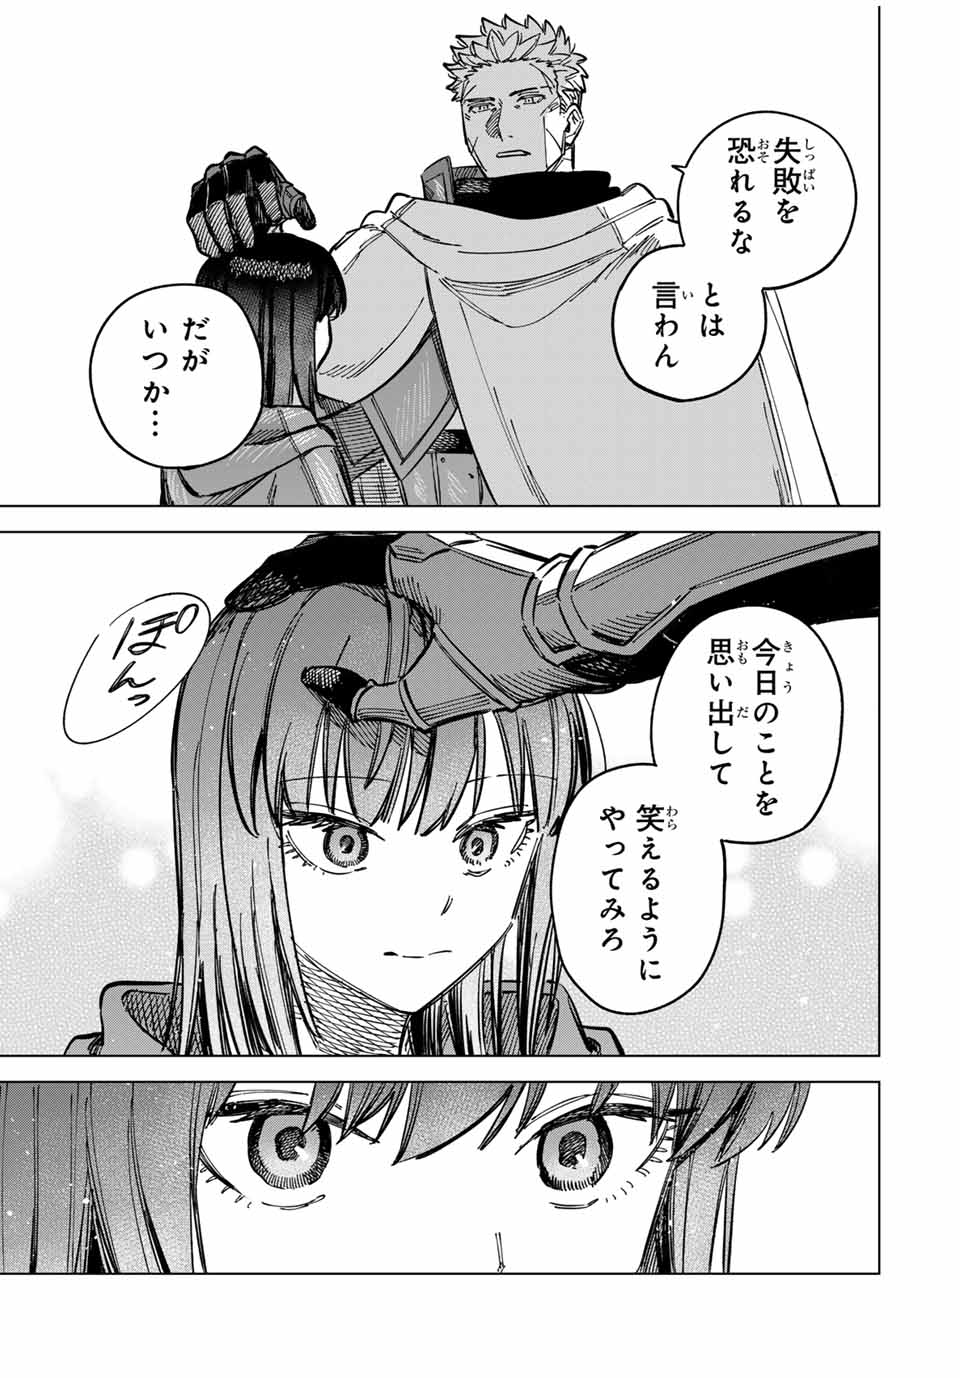 Witch and Mercenary 魔女と傭兵 第5.1話 - Page 5